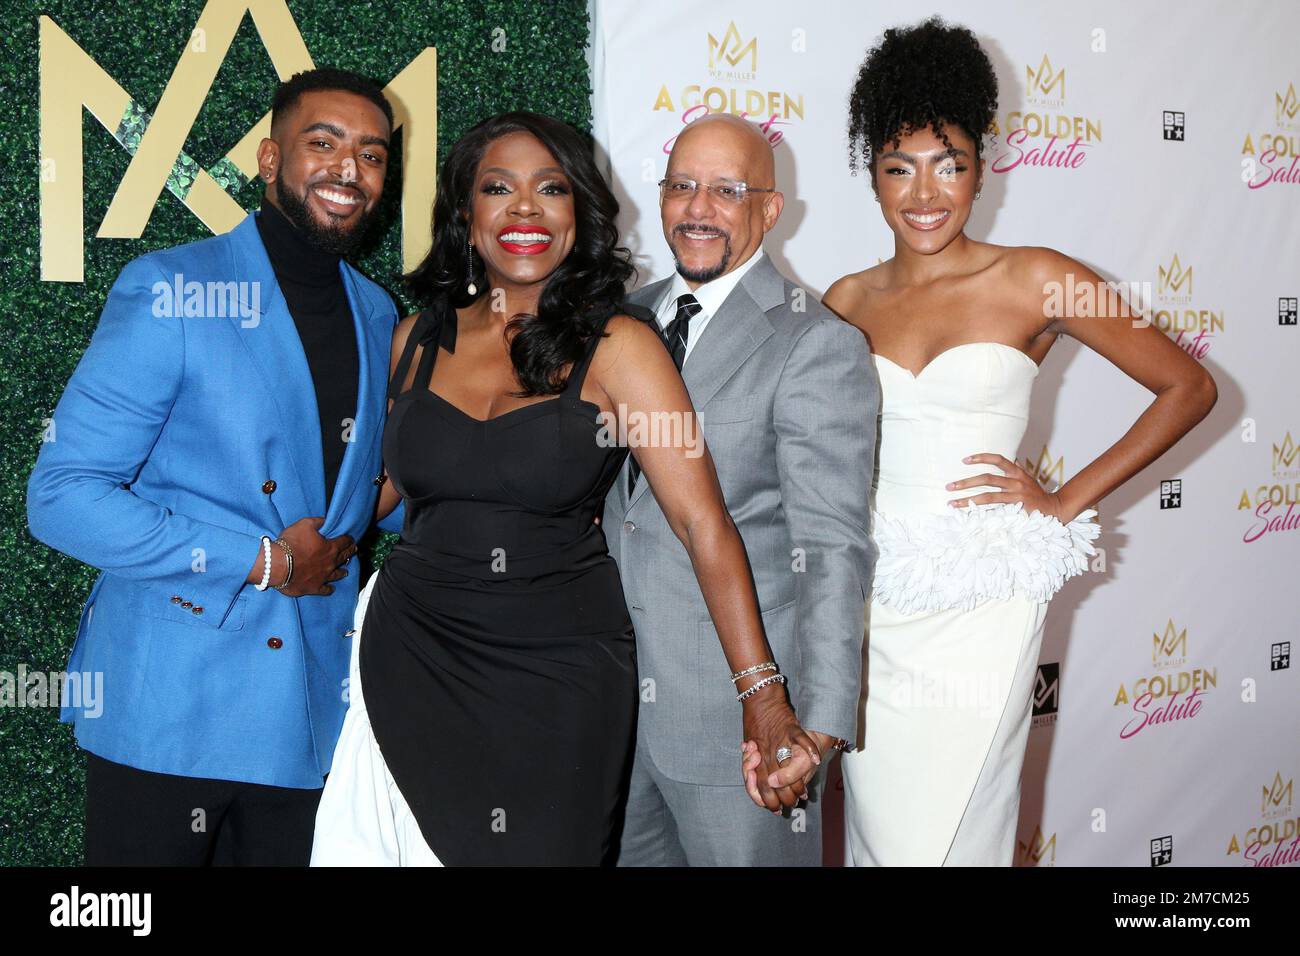 Marina Del Rey, USA. 08th Jan, 2023. LOS ANGELES - JAN 8: Etienne Maurice, Sheryl Lee Ralph, Vincent Hughes, Ivy-Victoria Maurice at A Golden Salute to Sheryl Lee Ralph and Niecy Nash-Betts at the Ritz Carlton Hotel on January 8, 2023 in Marina Del Rey, CA (Photo by Katrina Jordan/Sipa USA) Credit: Sipa USA/Alamy Live News Stock Photo